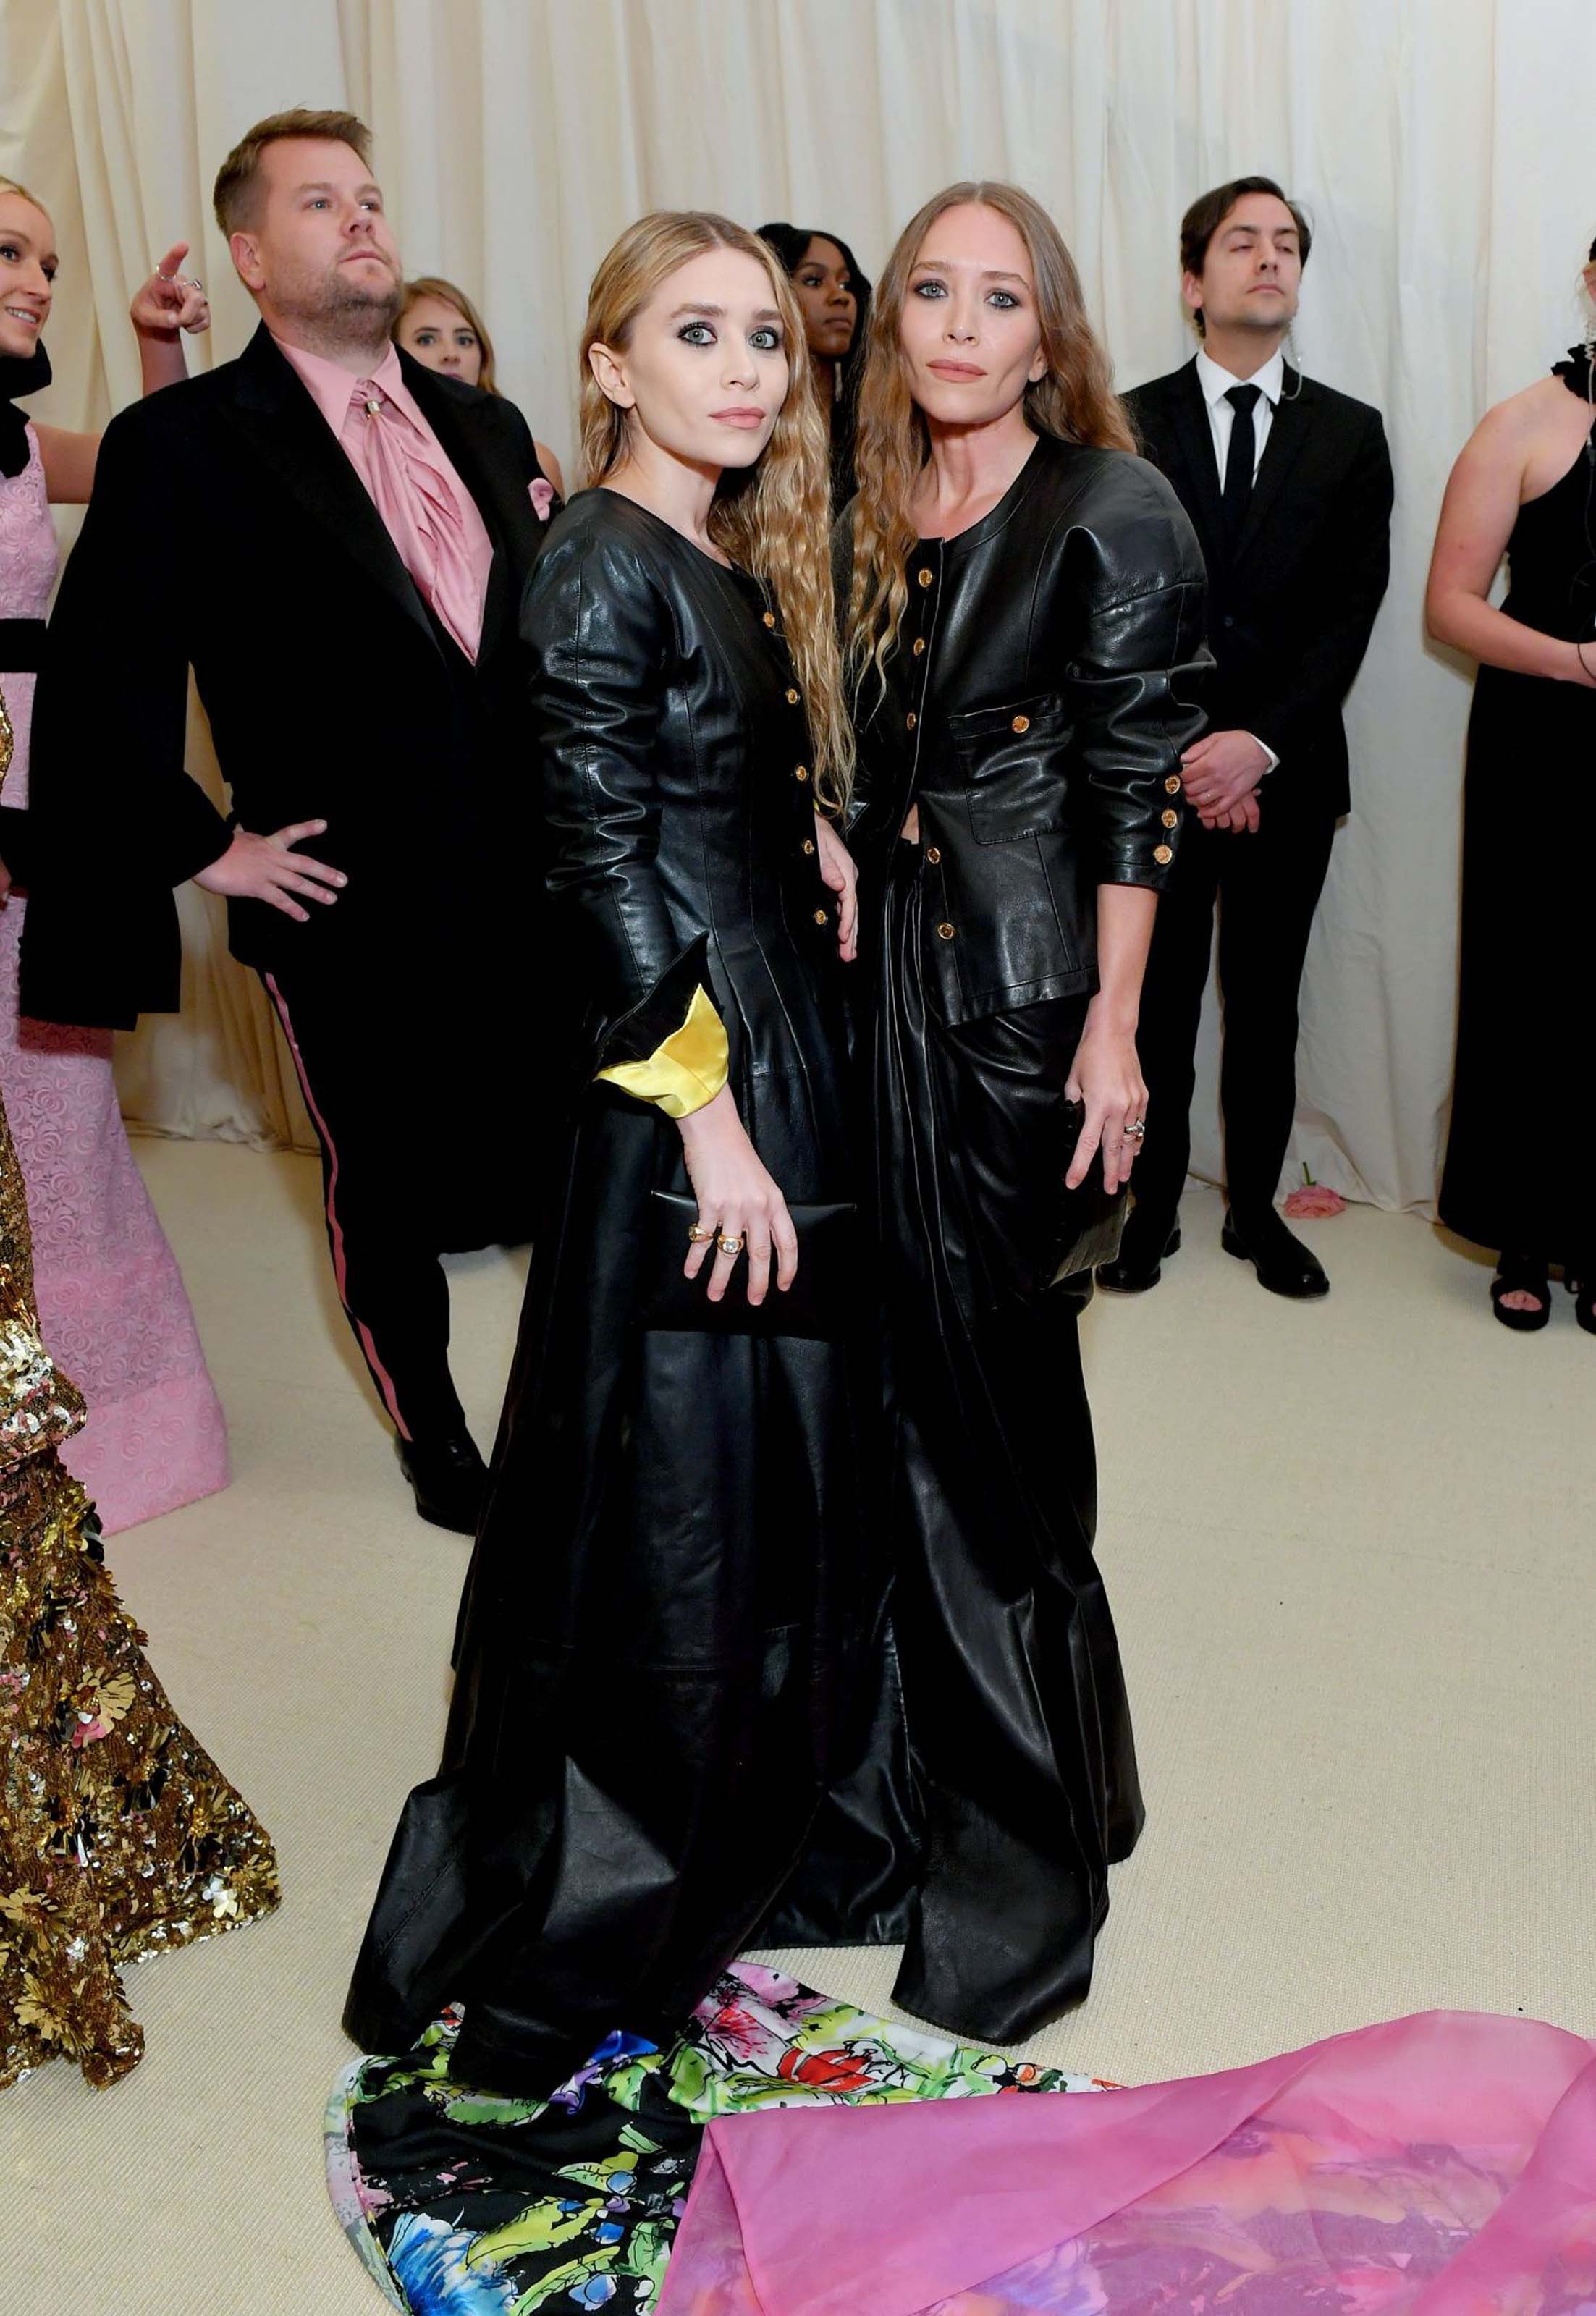 Mary-Kate and Ashley Olsen attend The 2019 Met Gala